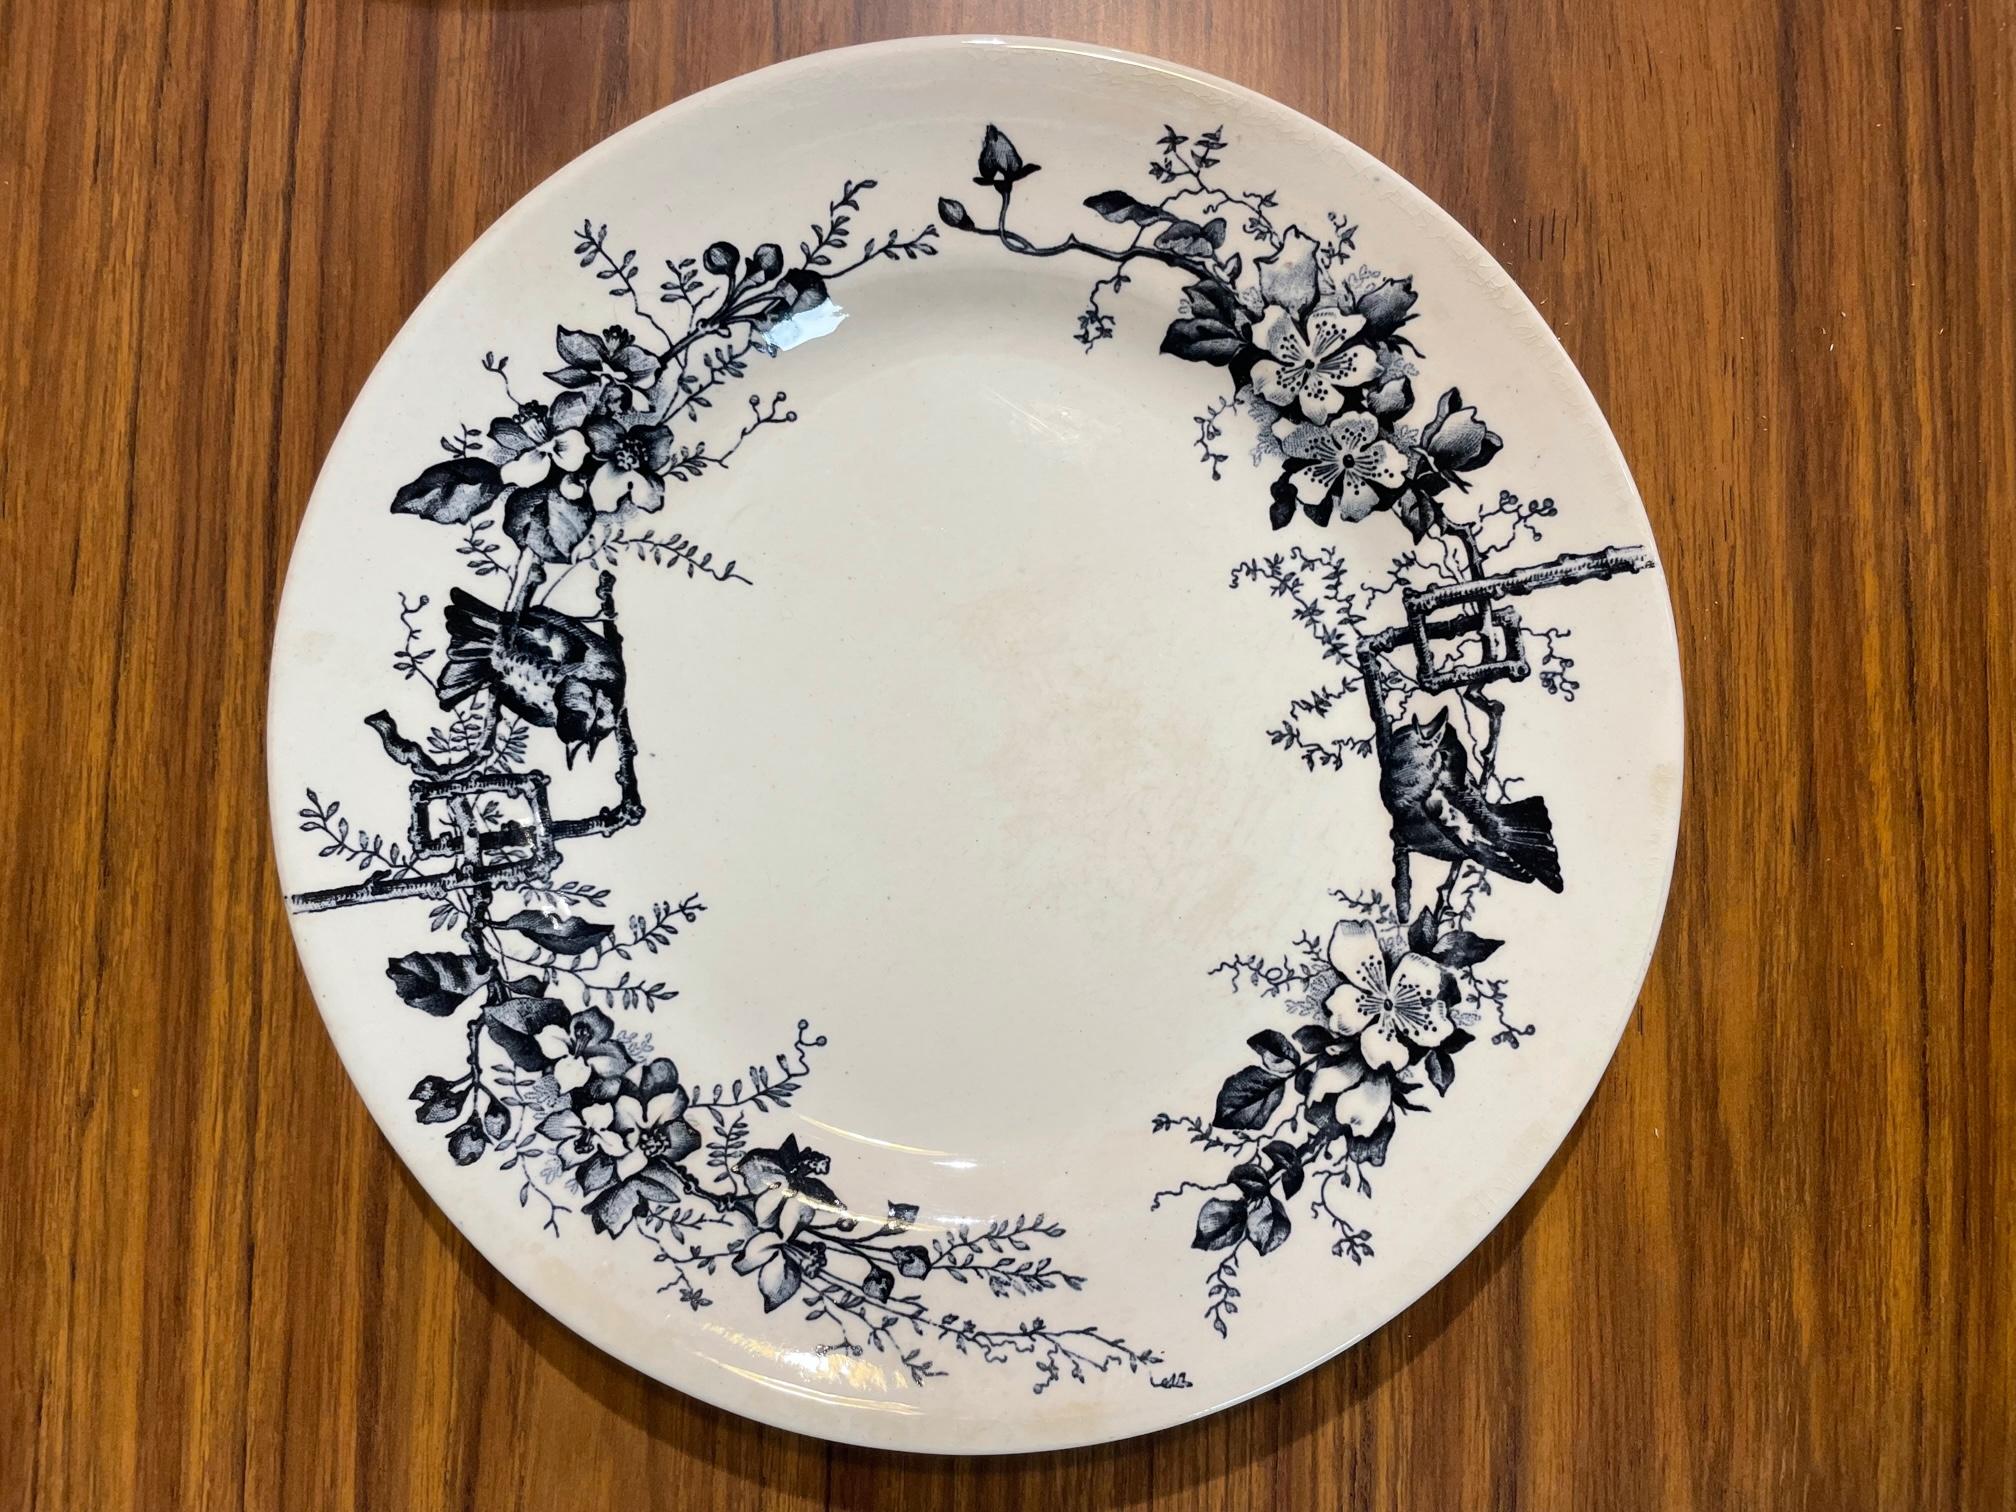 Plates created for Emile Bourgeois with a rare decor of birds.
Two different decors, 3 of one, 12 of the second.
Edited end of the XIXth century, beginning of the XXst.